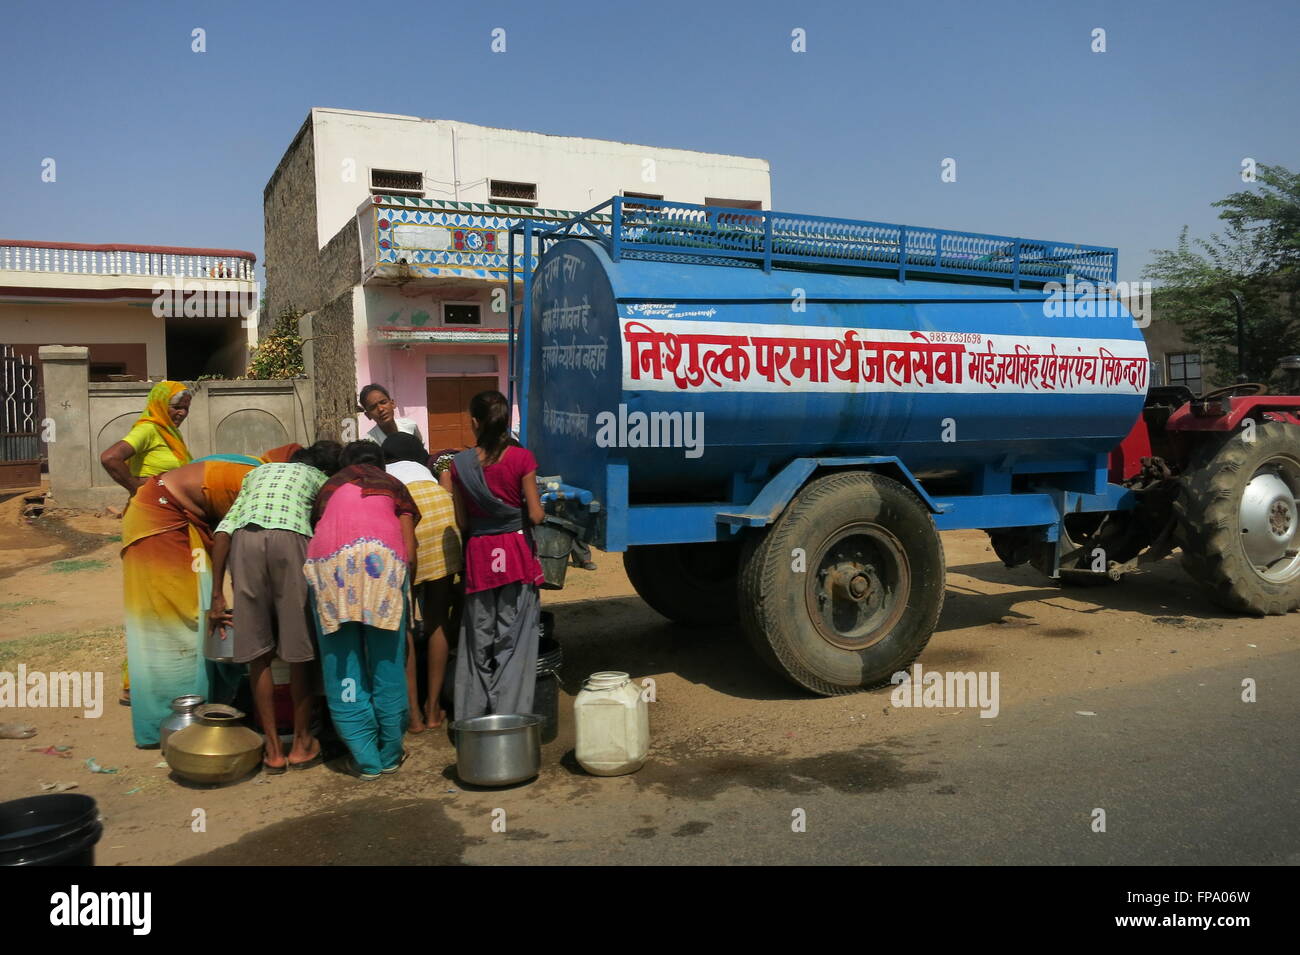 Rajasthan, India, people on a public road gather around a government water supply tanker to fill their containers with water Stock Photo